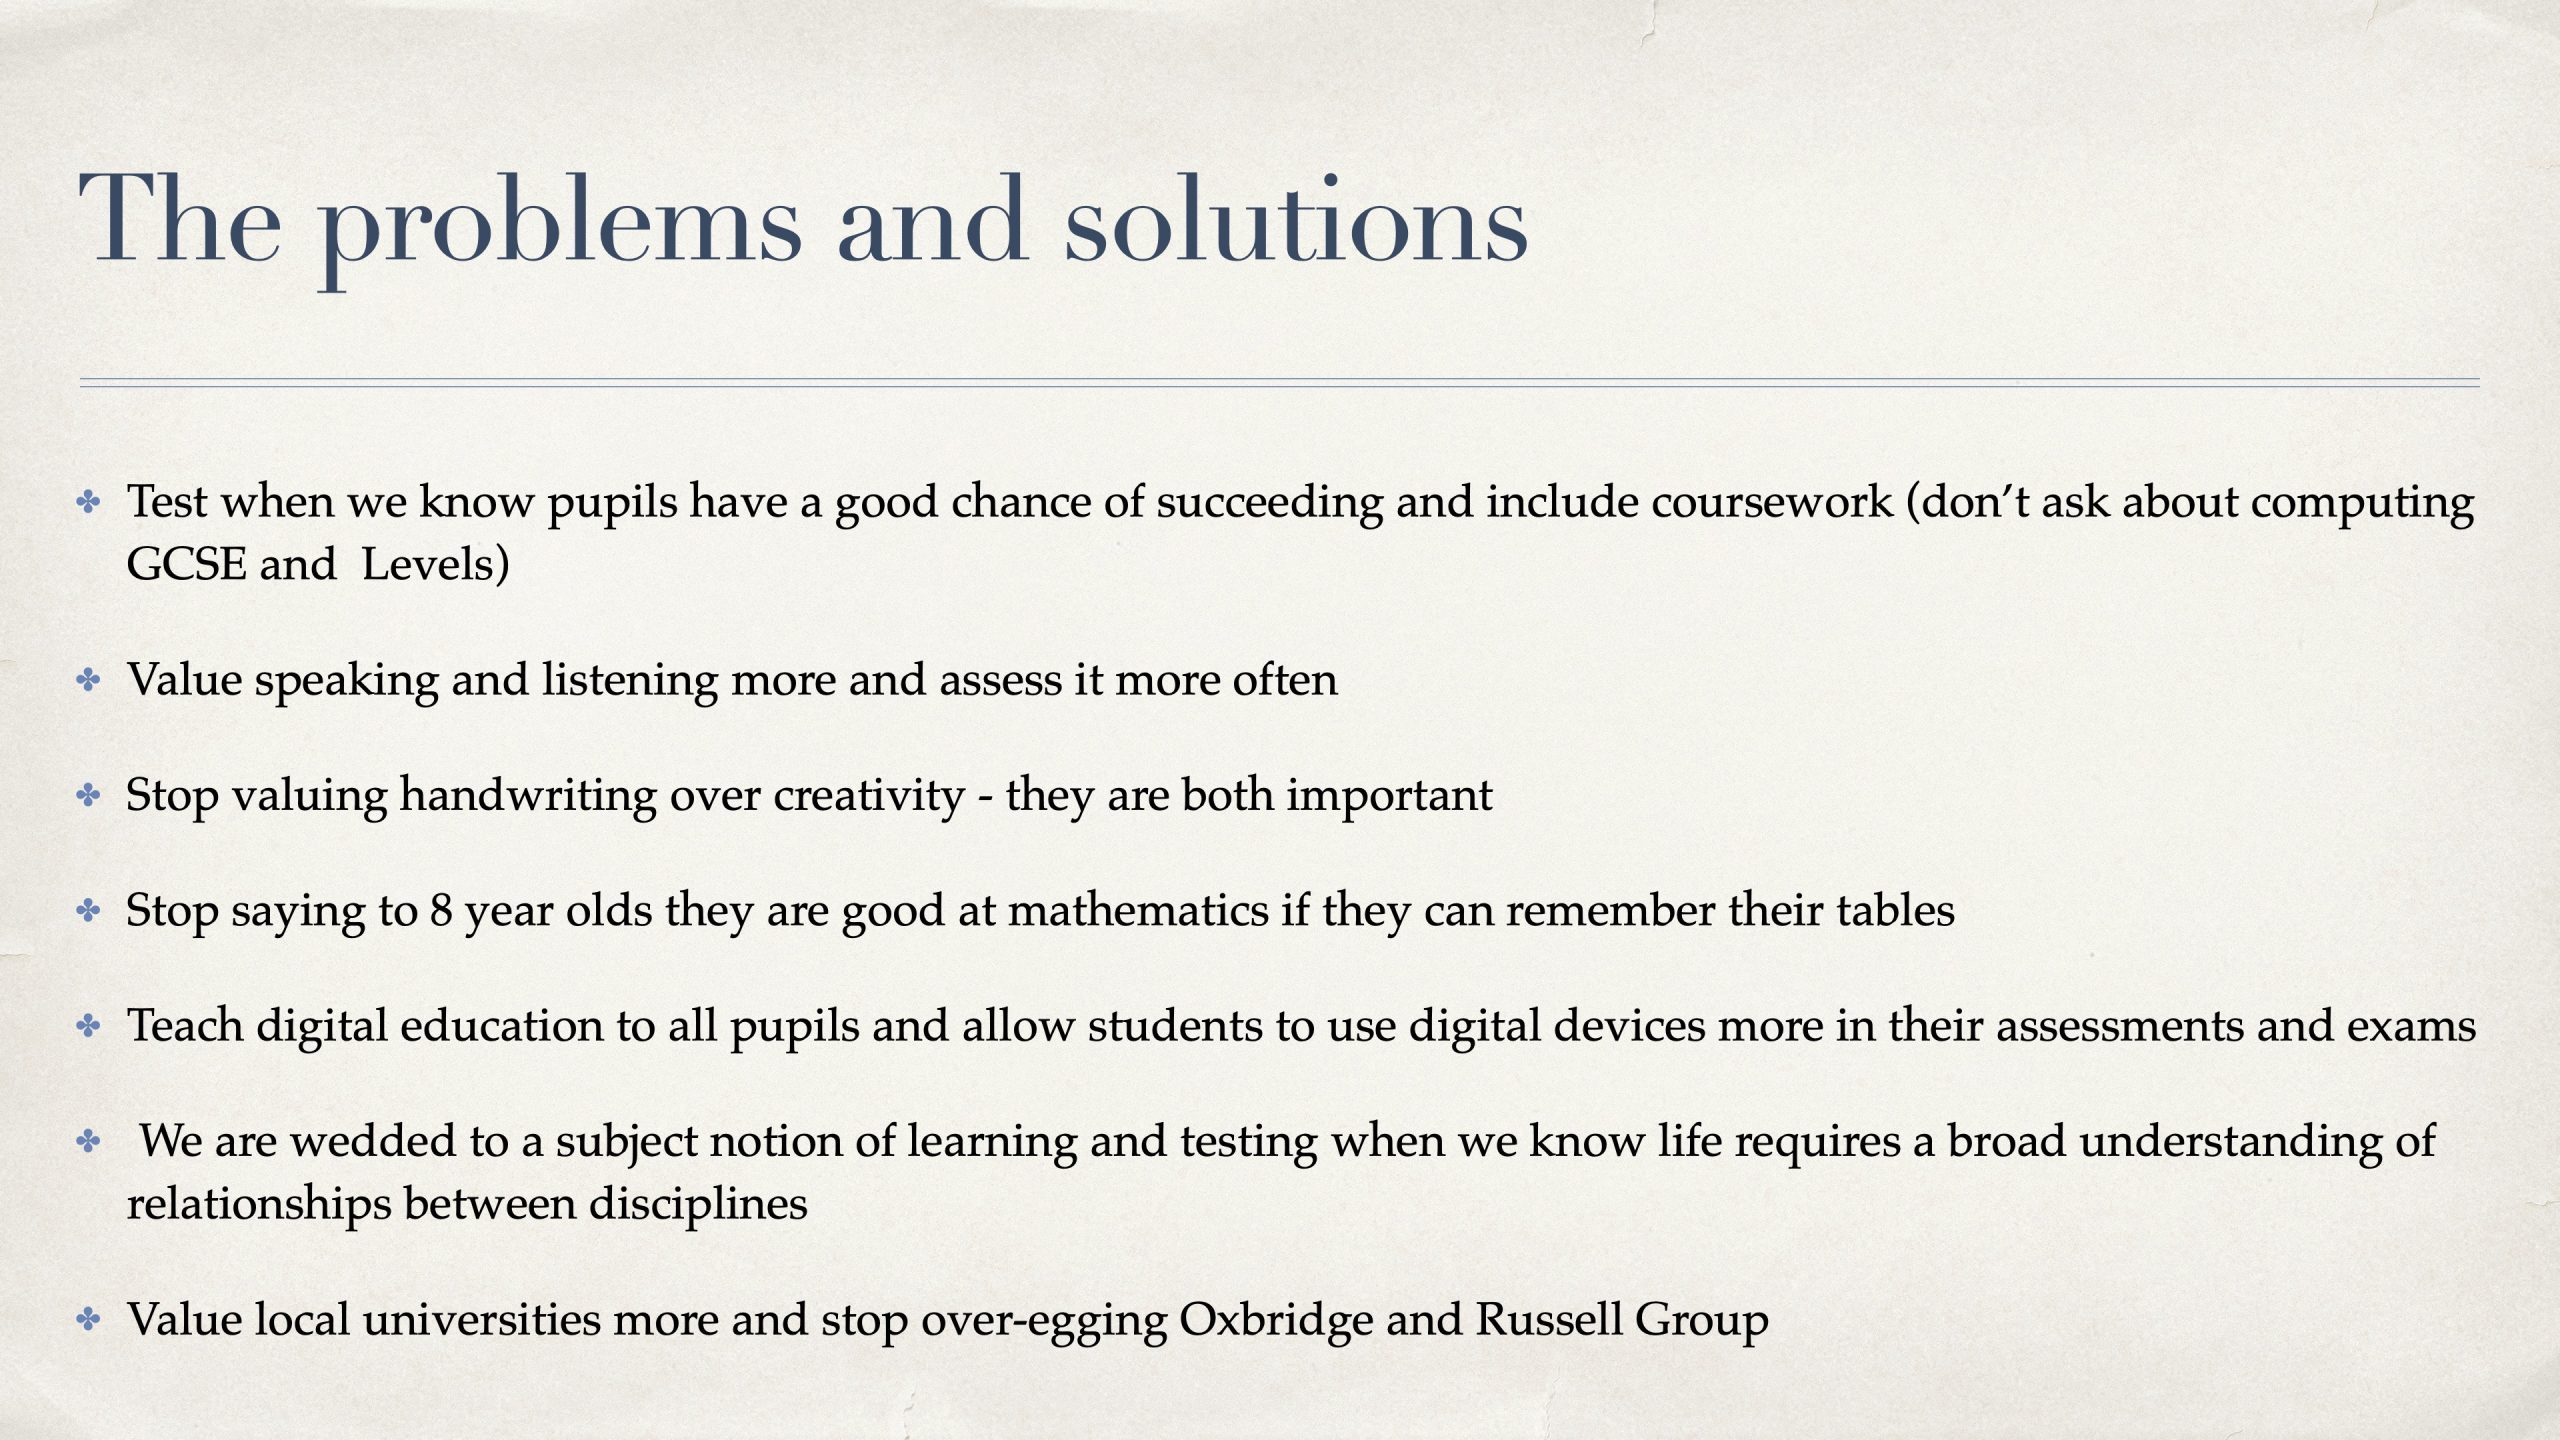 Slide 5. The problems and solutions